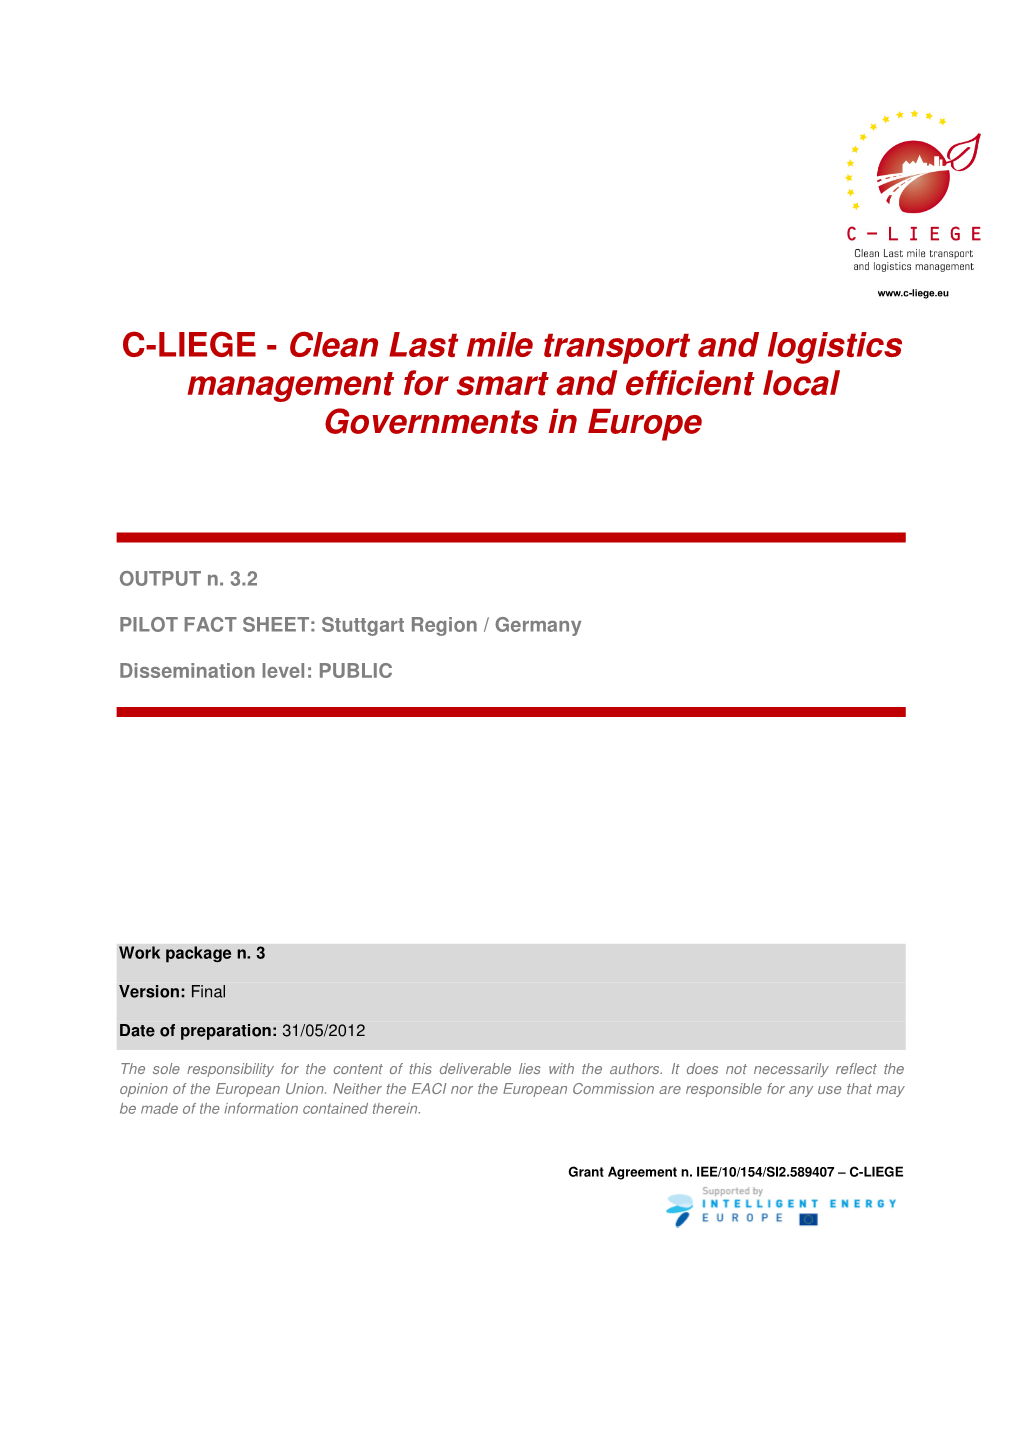 Clean Last Mile Transport and Logistics Management for Smart and Efficient Local Governments in Europe